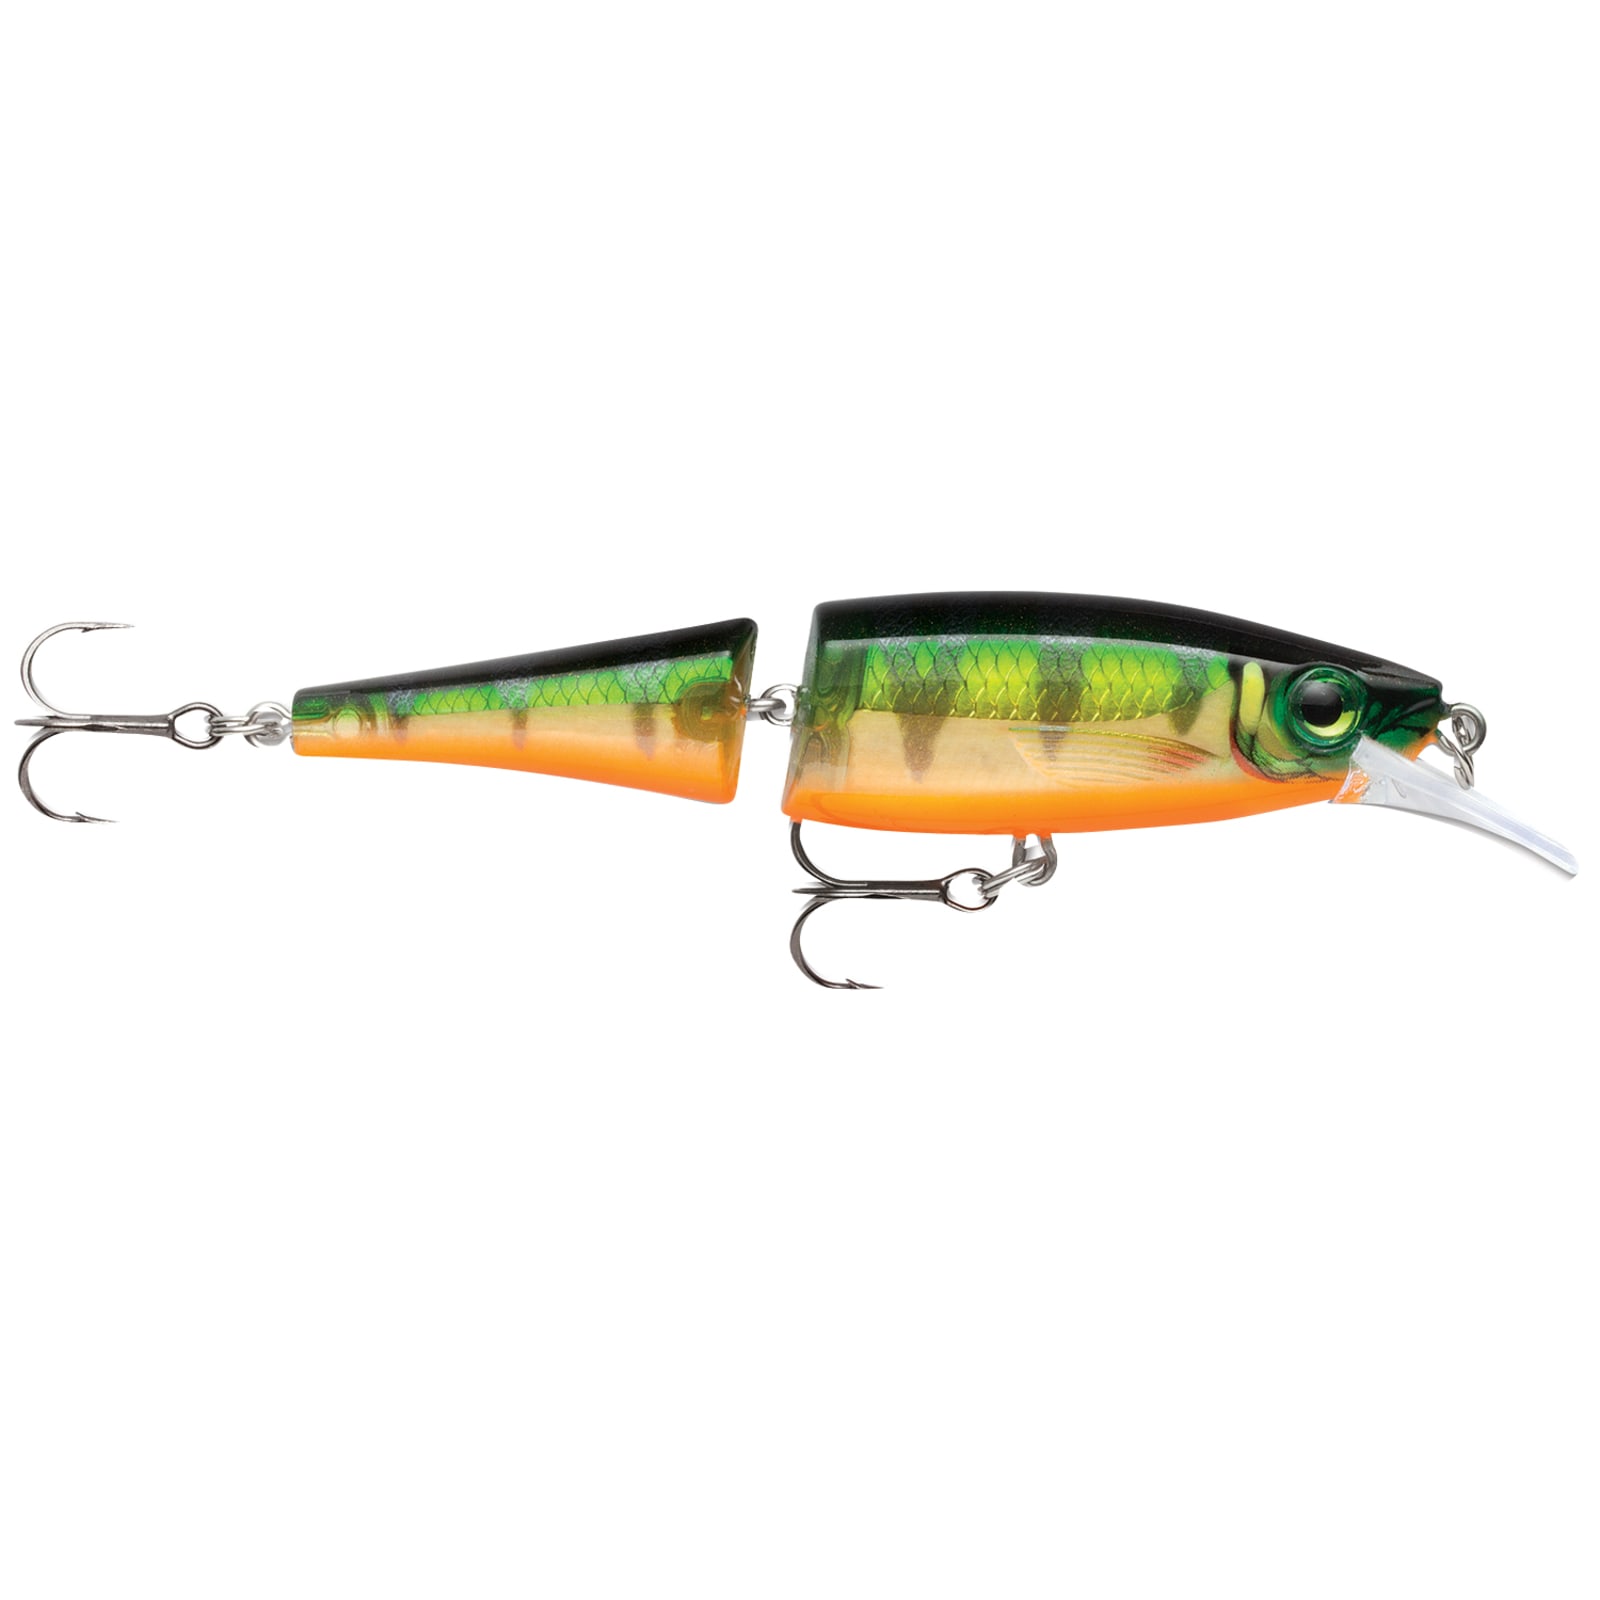 BX Jointed Minnow - Perch by Rapala at Fleet Farm